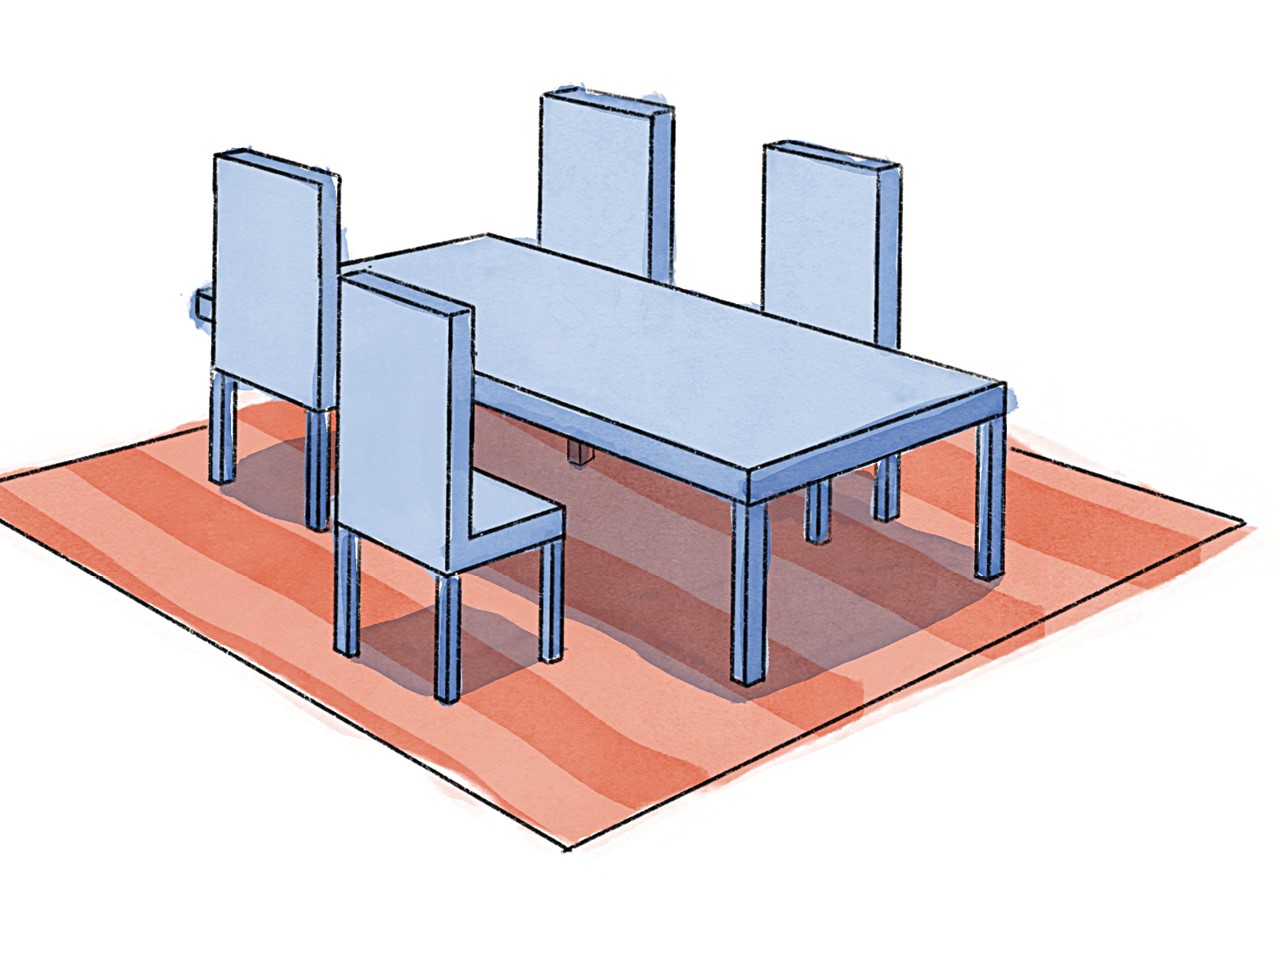 rug size buying guide illustration of a blue table with four blue chairs on a peach striped rug